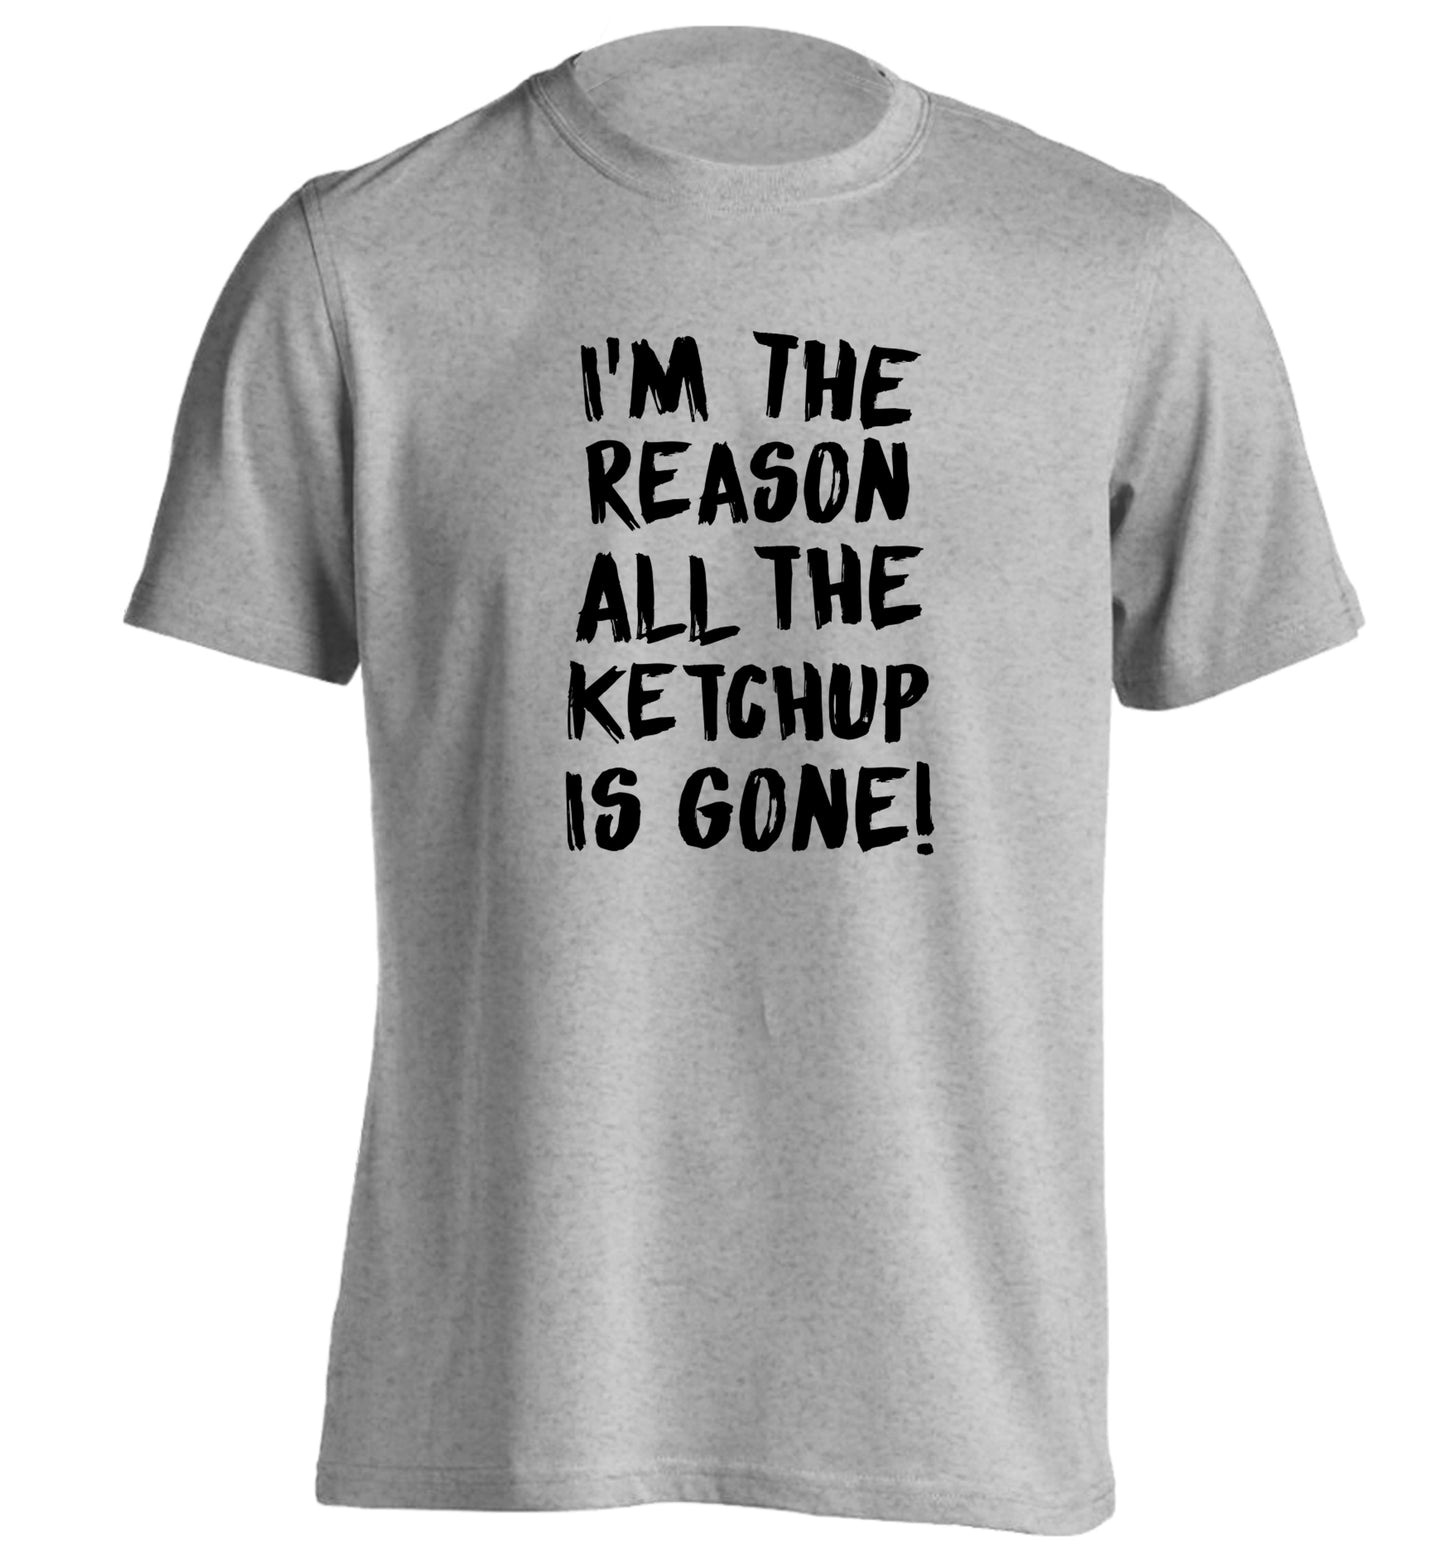 I'm the reason why all the ketchup is gone adults unisex grey Tshirt 2XL